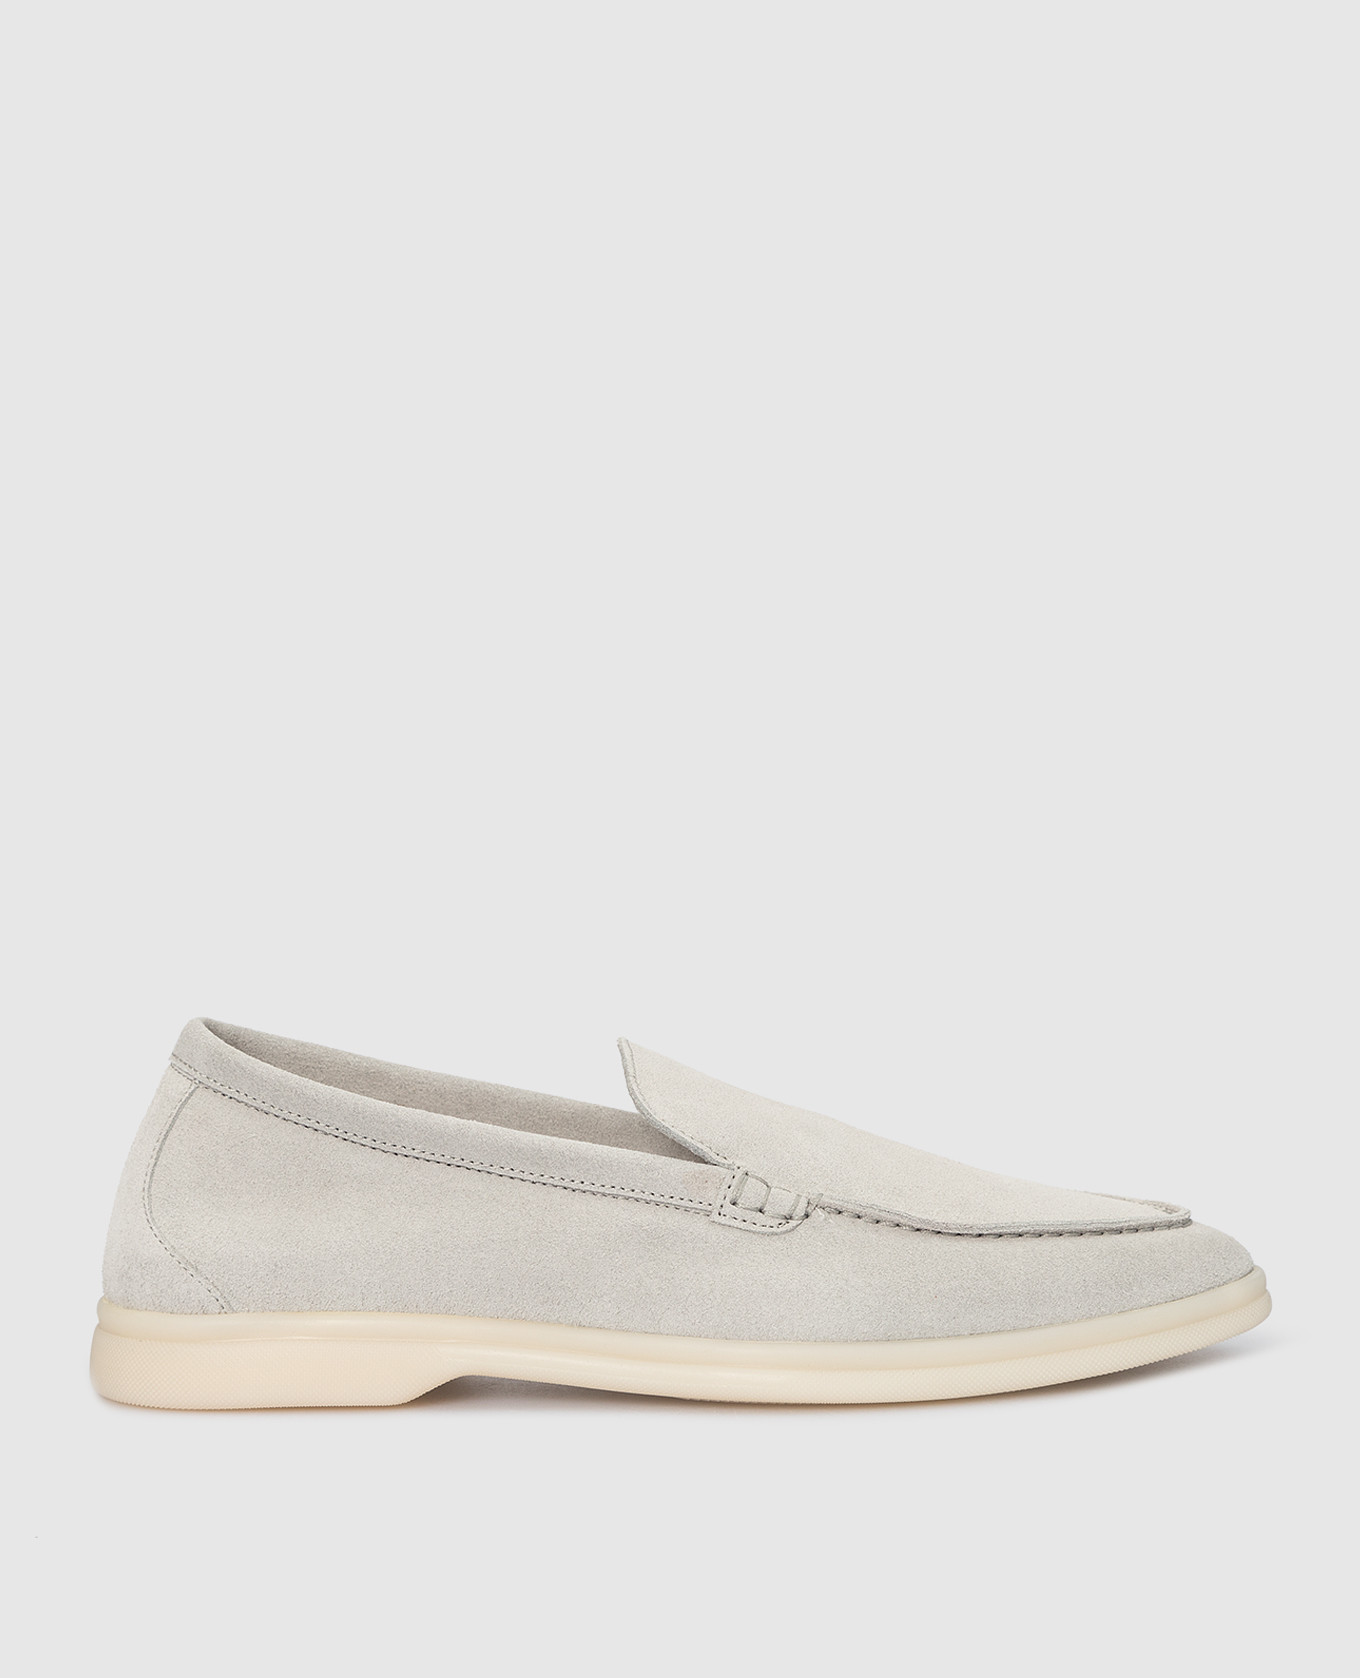 Light gray suede slippers